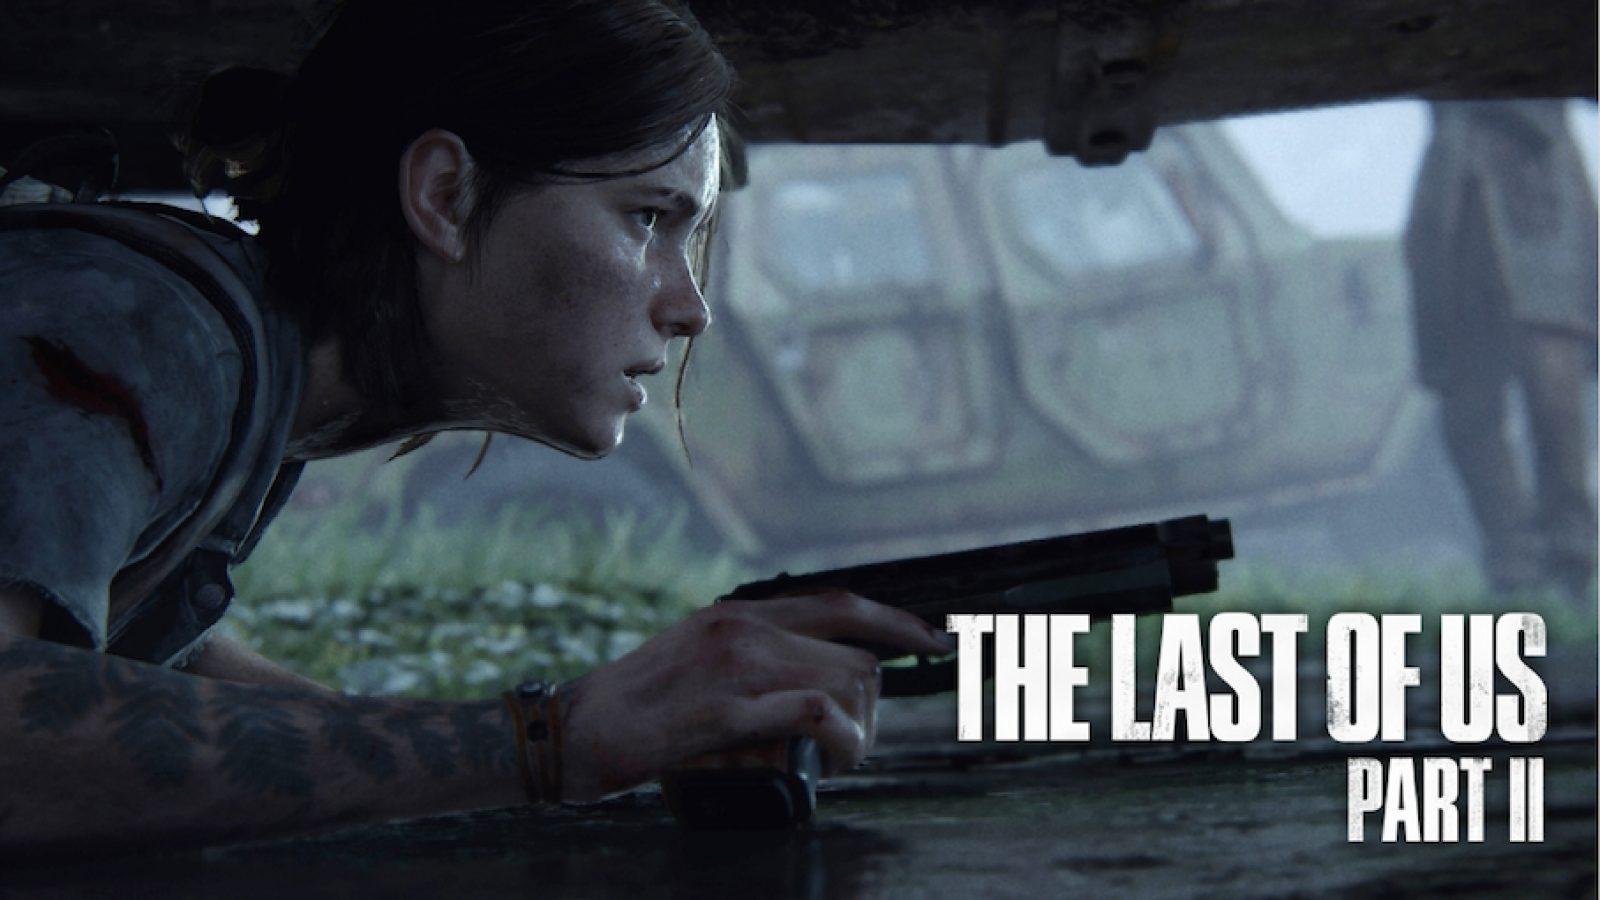 The Last of Us Part II Set for Release in February 2020